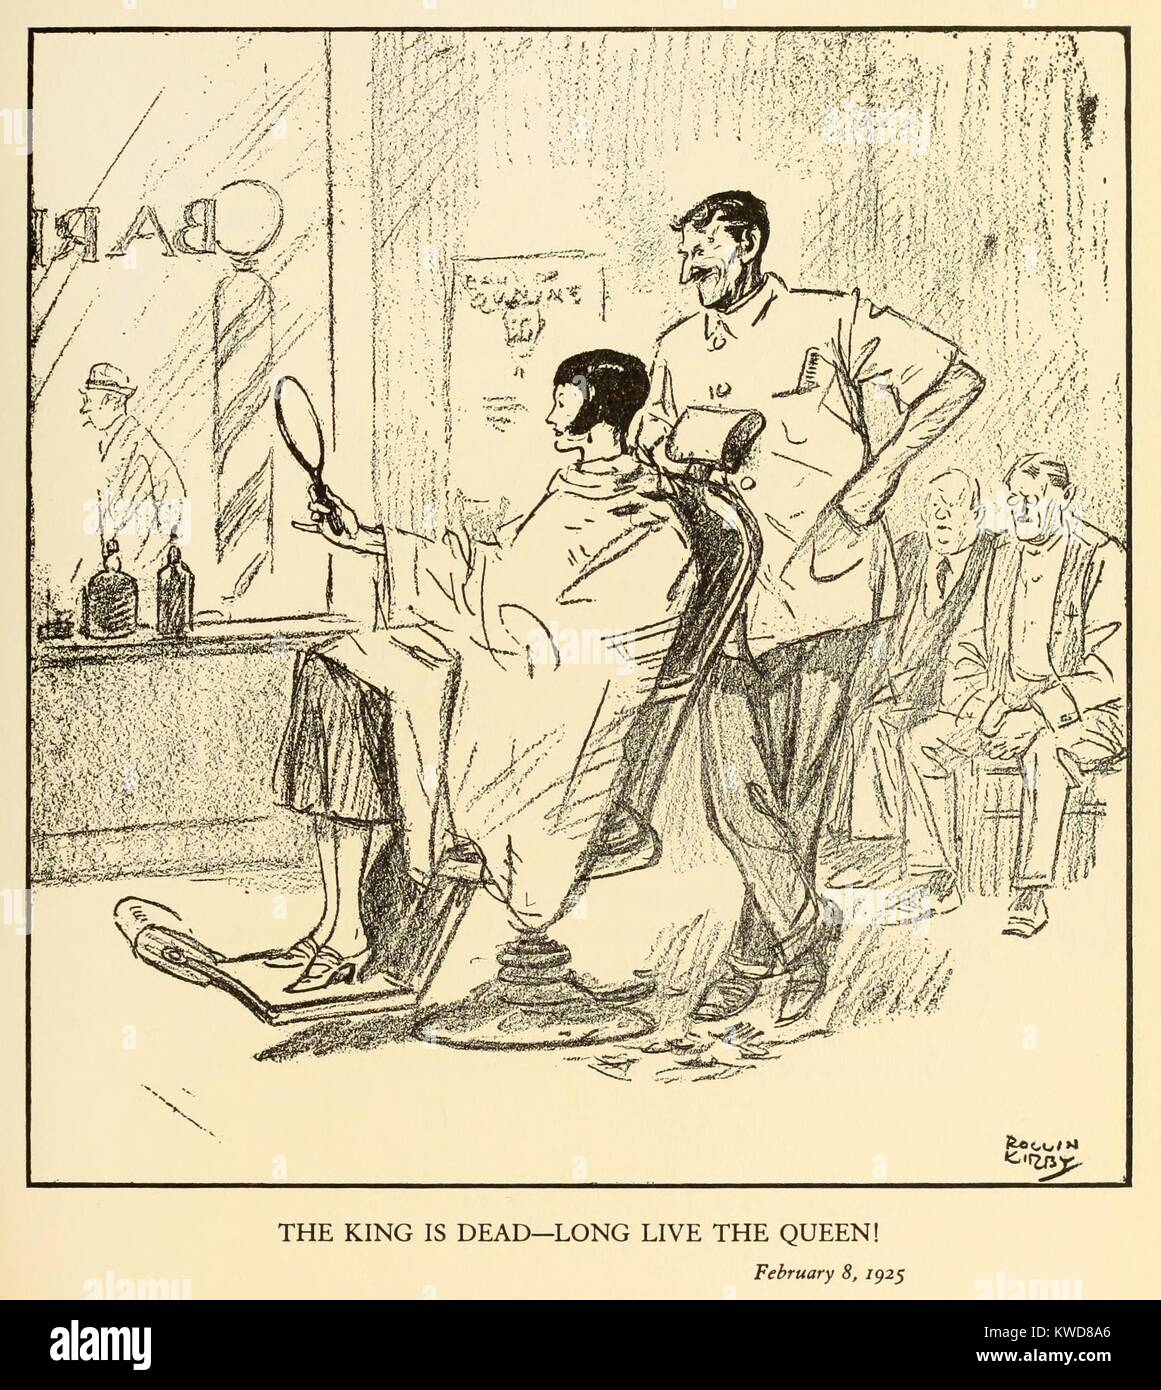 THE KING IS DEAD-LONG LIVE THE QUEEN. Young woman having her hair cut short in a barber shop. Feb. 8, 1925. Cartoon by Rollin Kirby for the New York World newspaper. (BSLOC 2015 17 198) Stock Photo